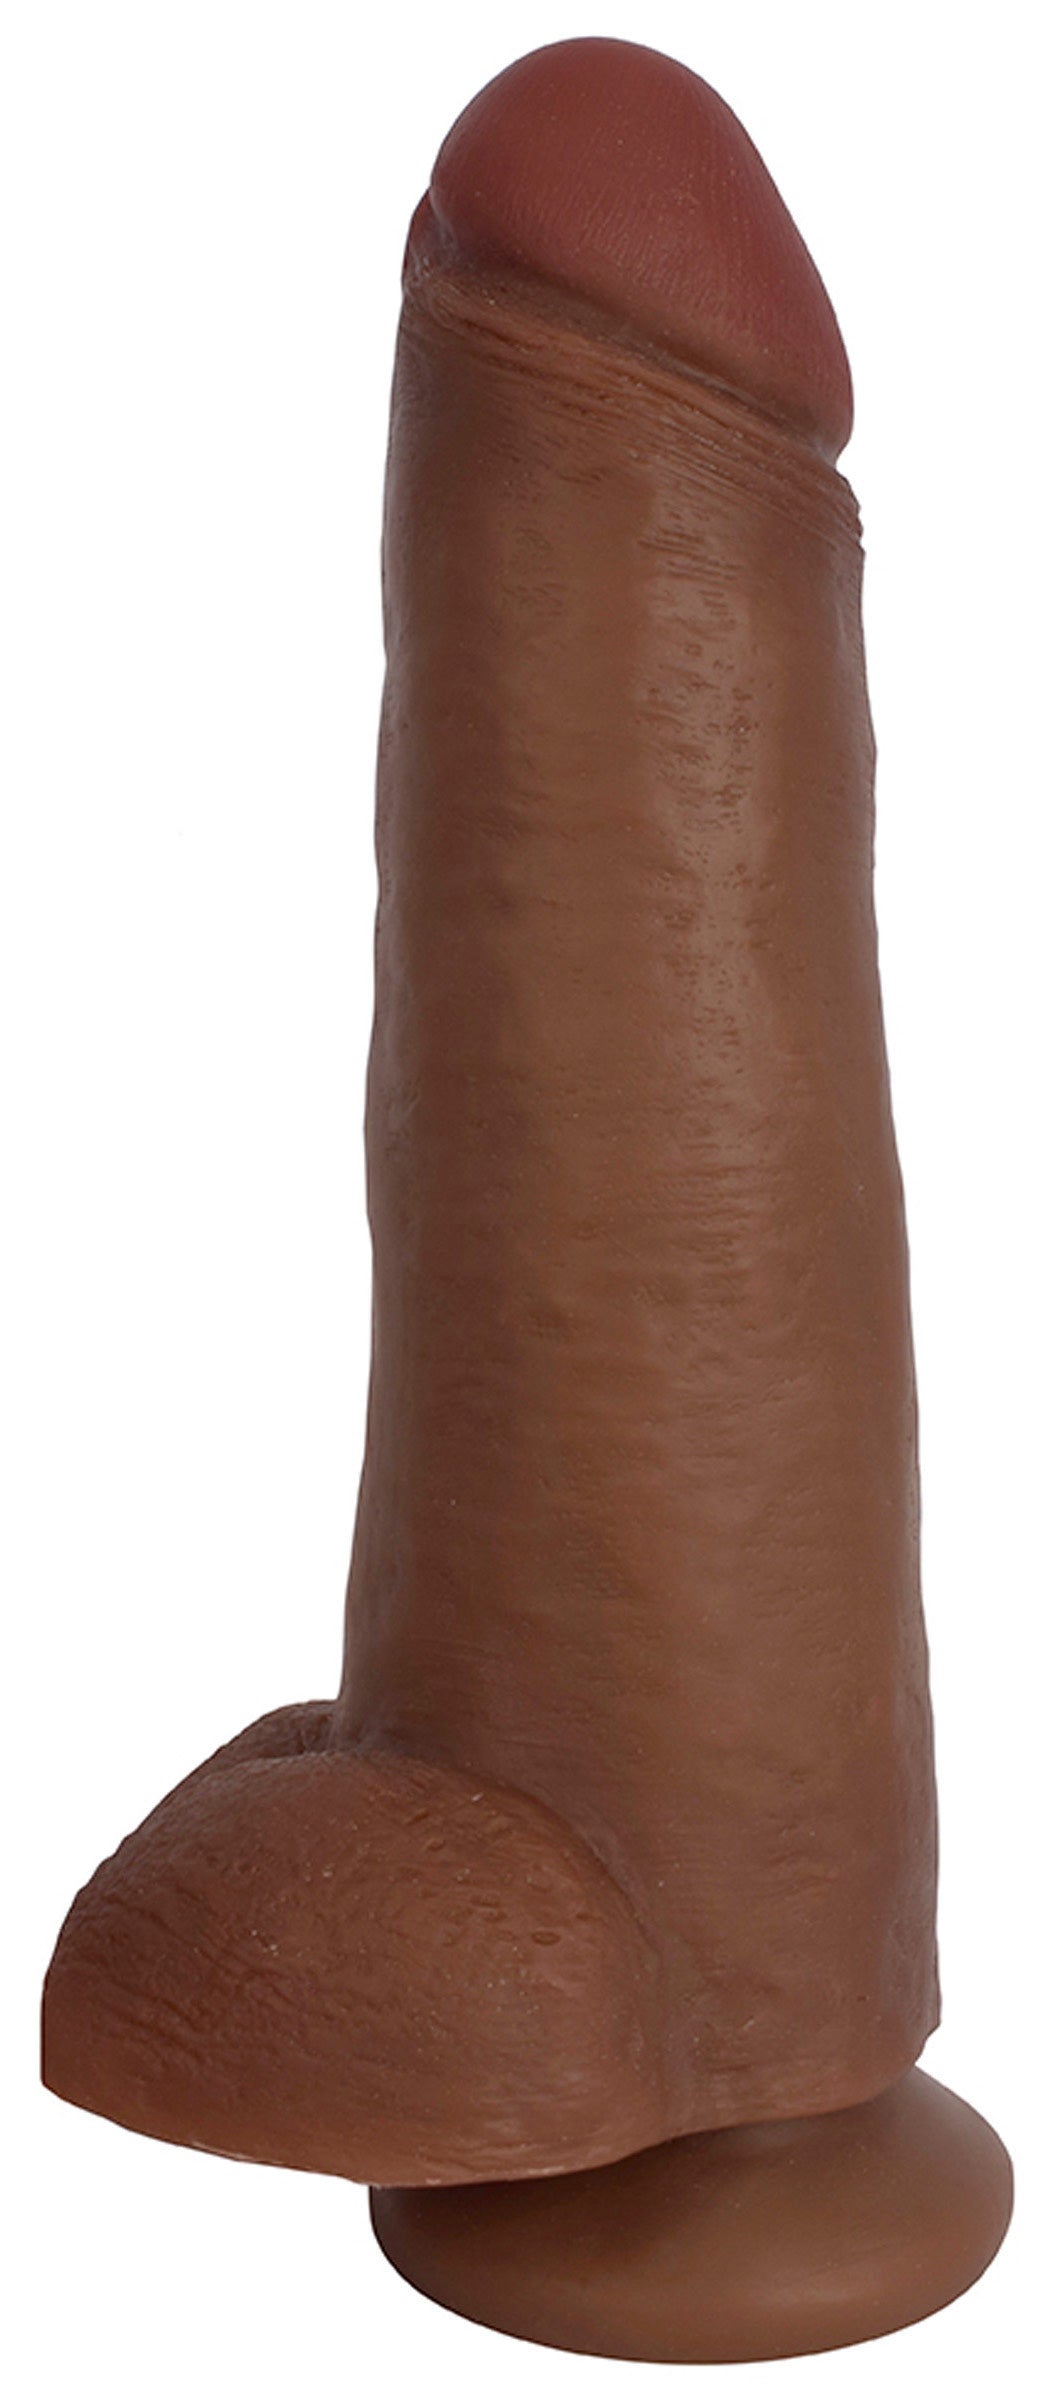 JOCK 12 Inch Dong with Balls Brown